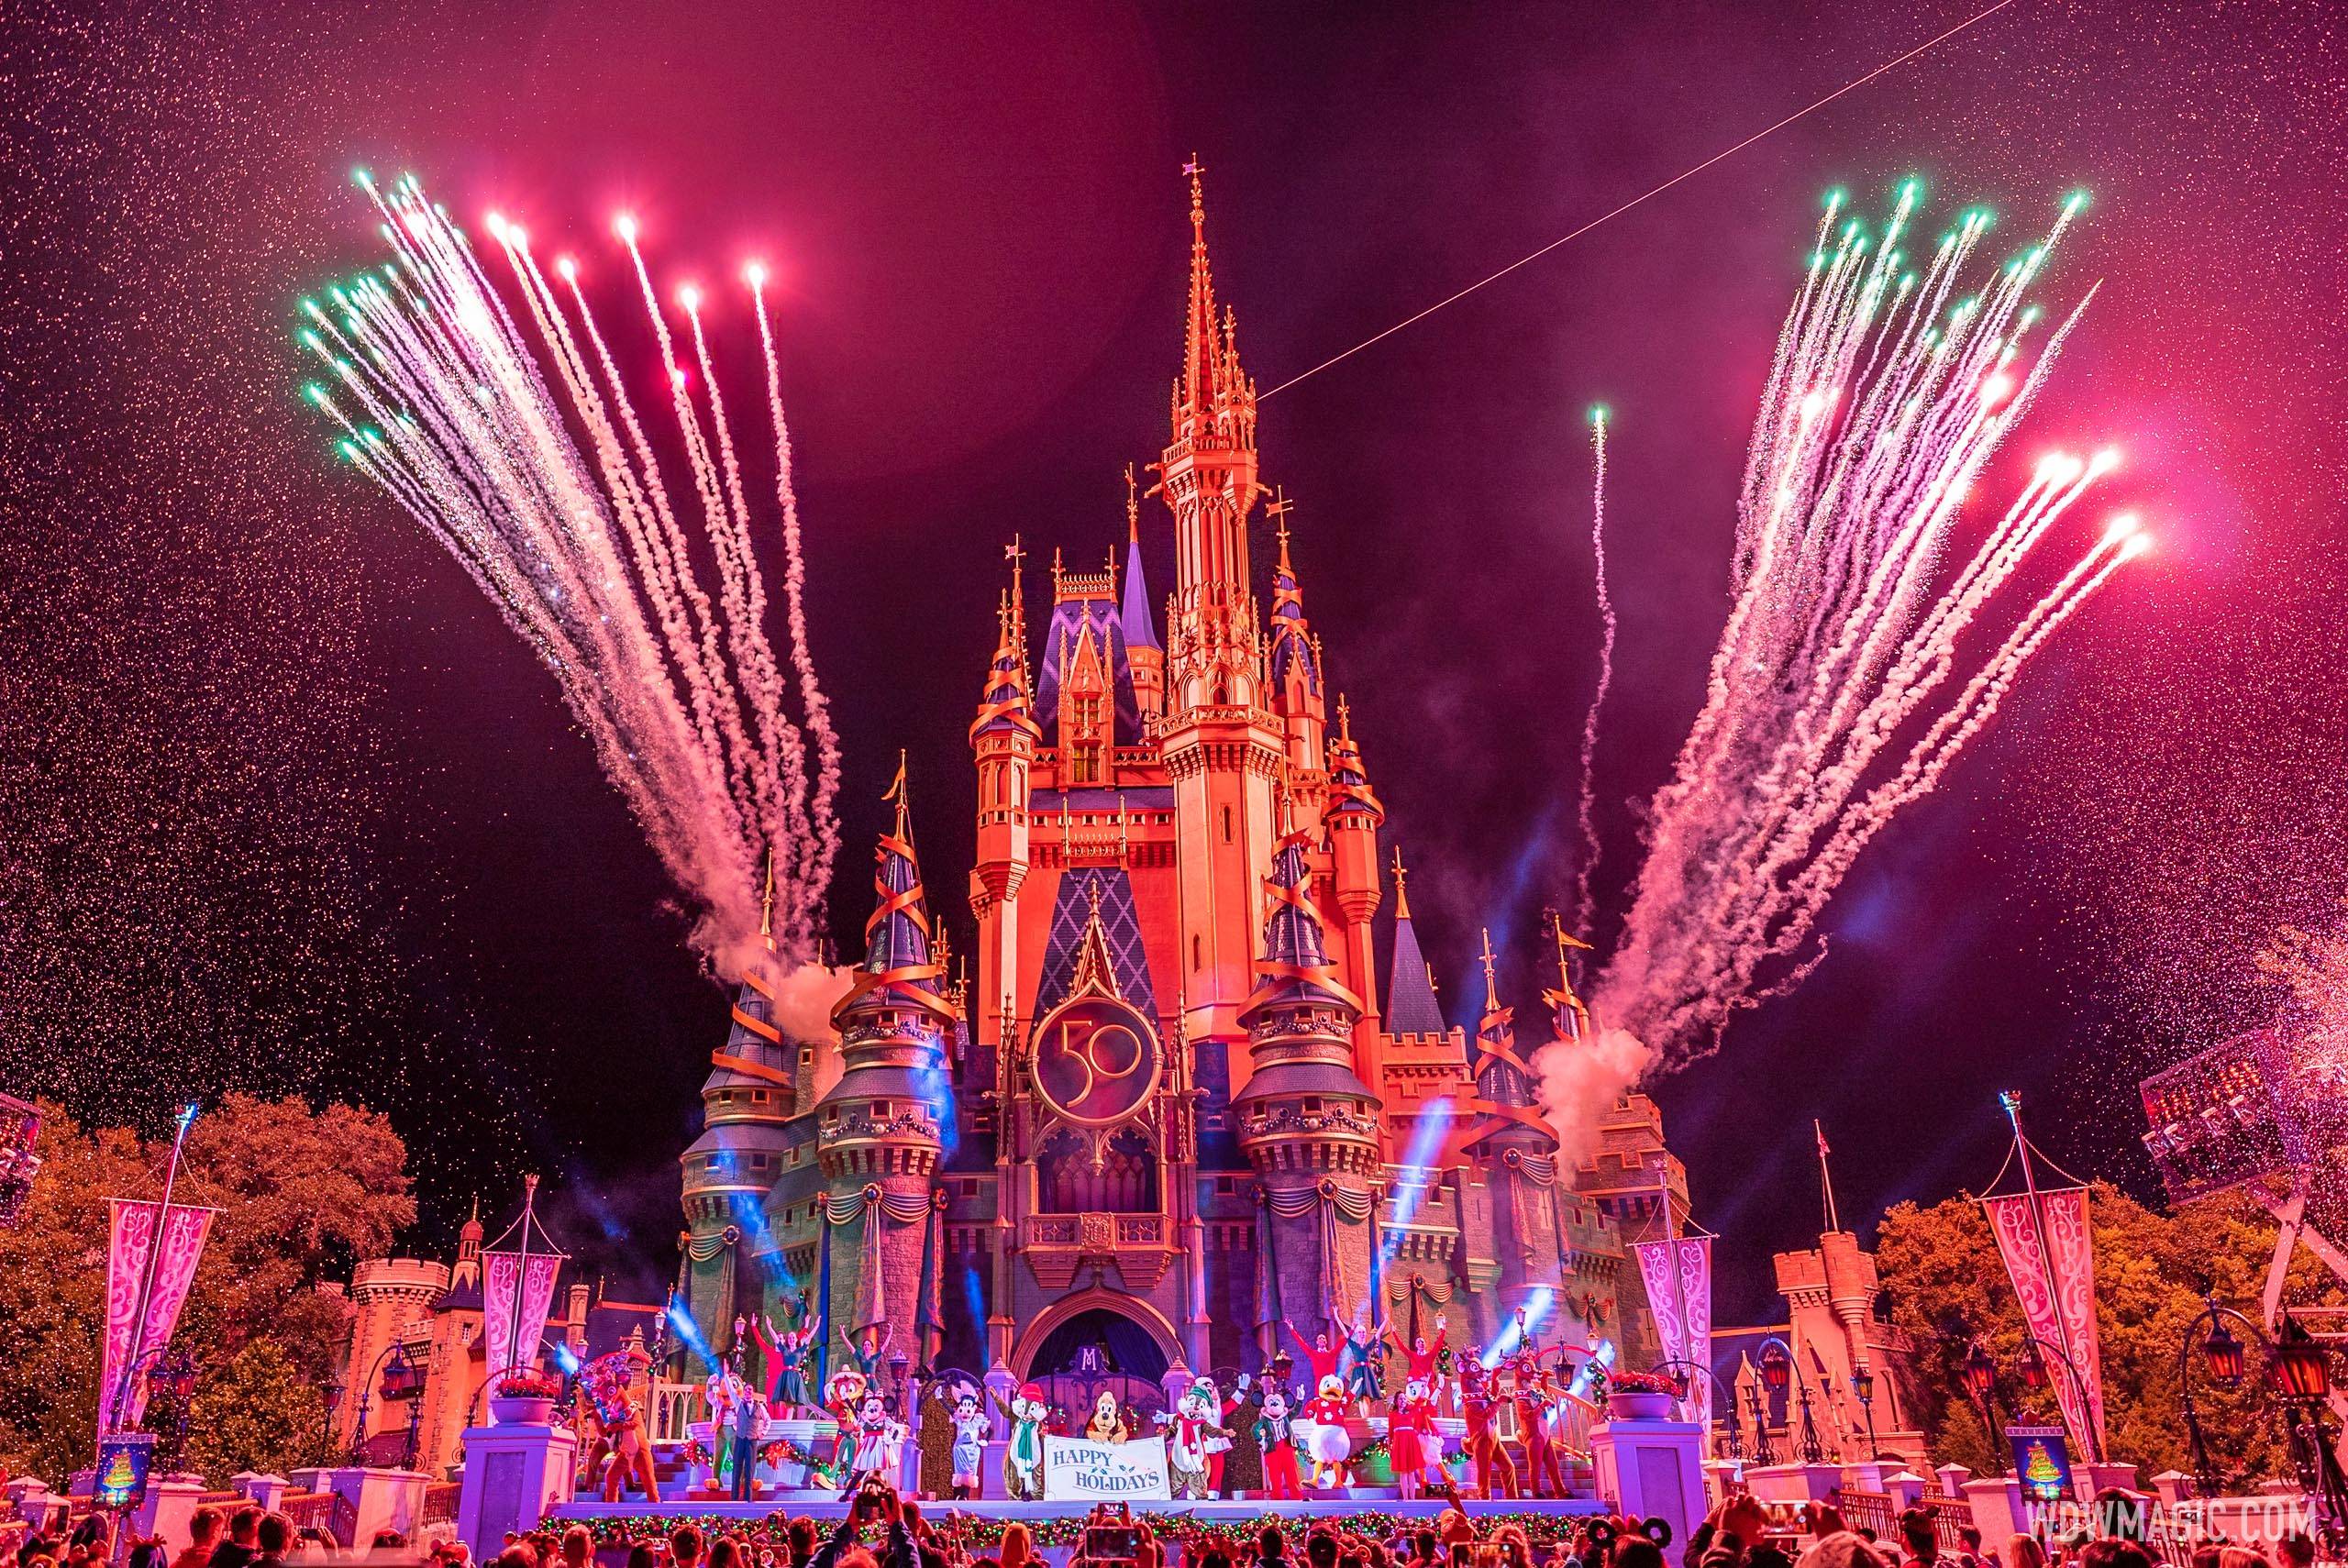 Full castle stage shows return to Walt Disney World with 'Mickey and Minnie's Very Merry Memories' at Magic Kingdom